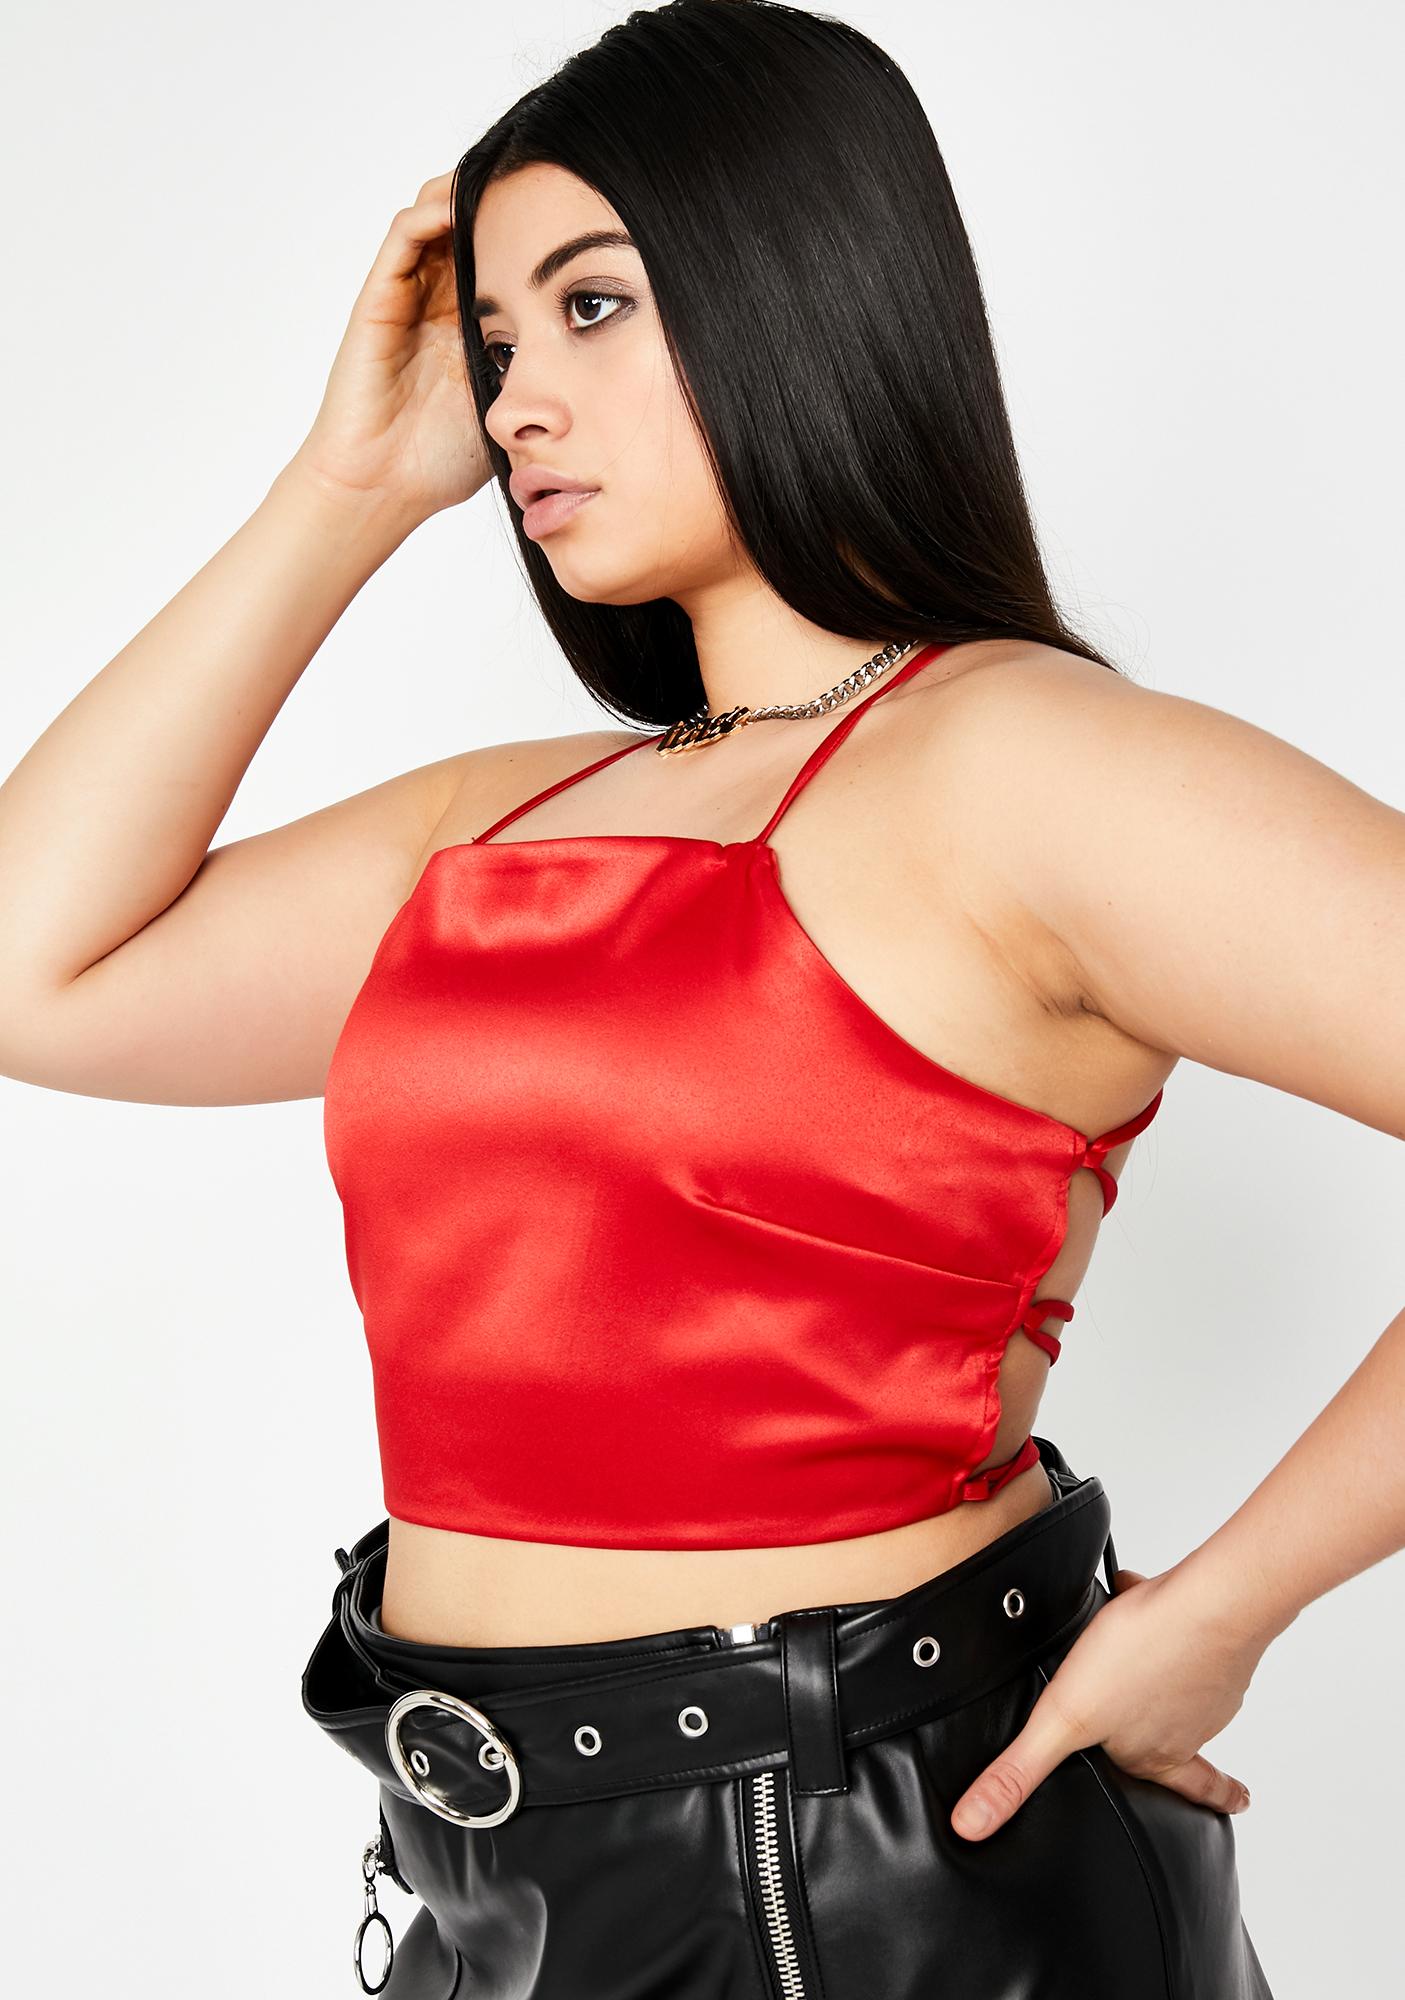 red halter top plus size